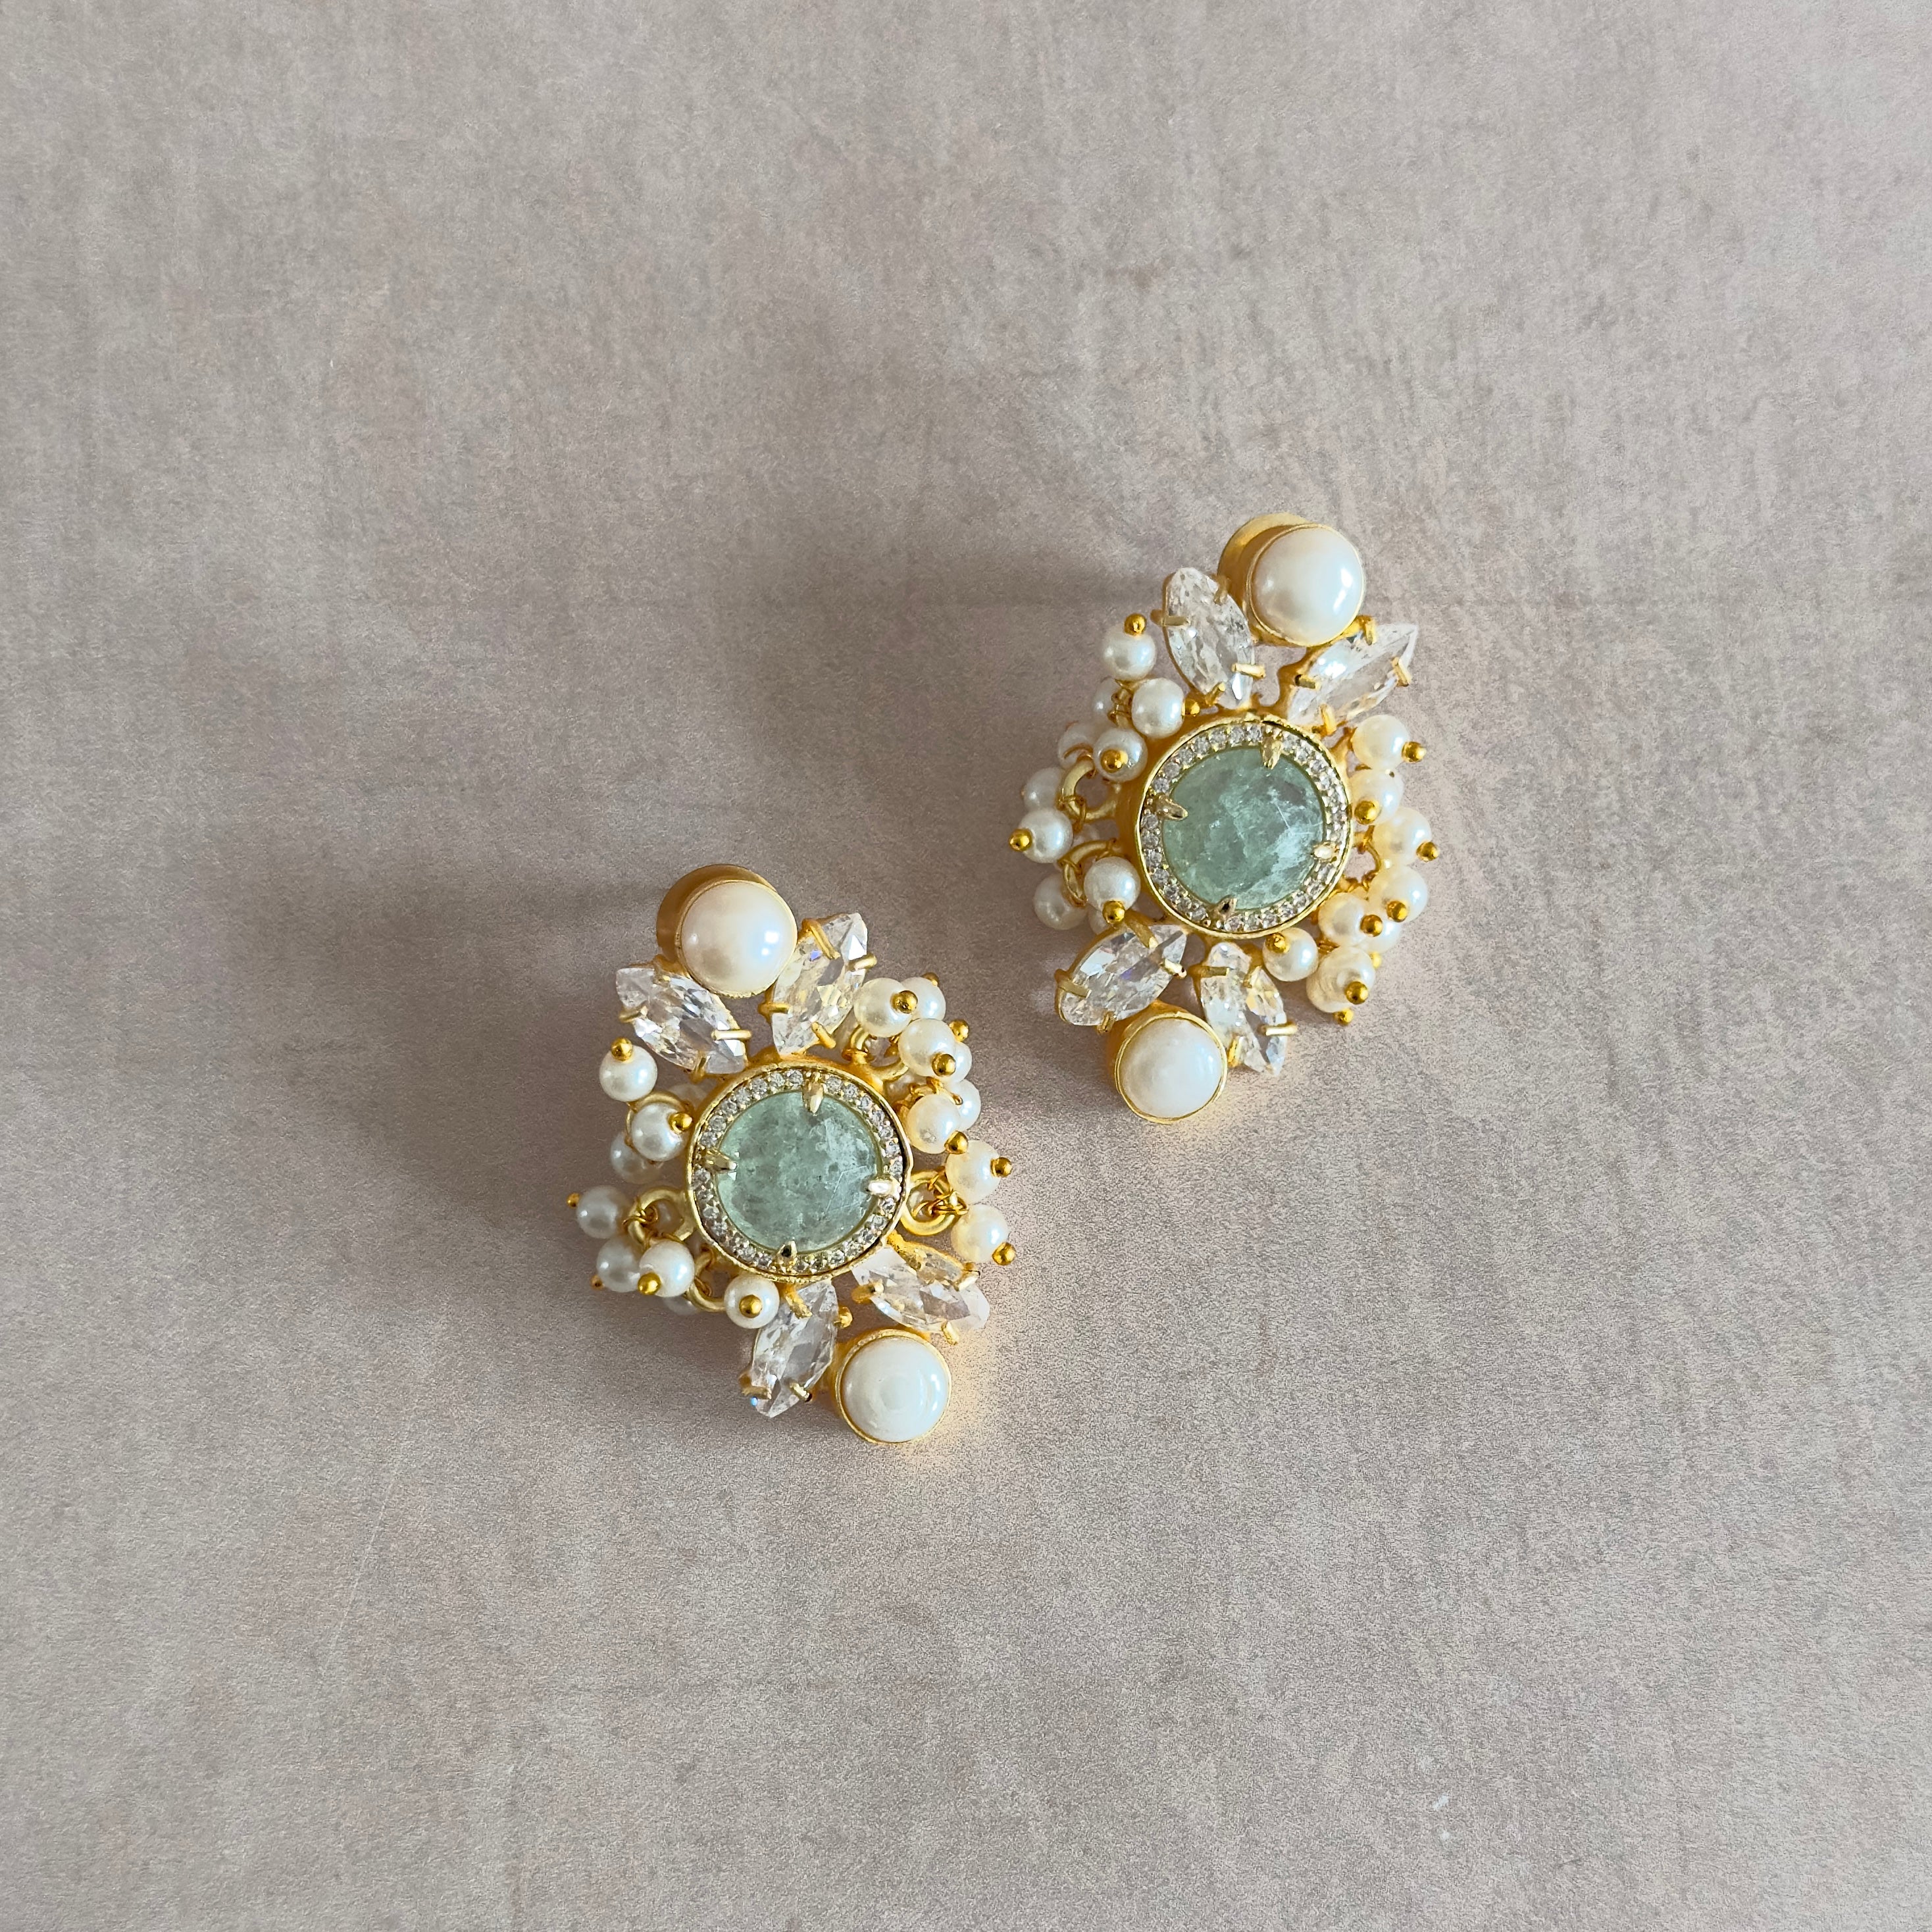 Experience the mesmerizing beauty of our Hena Crystal Pearl Earrings. Featuring aquamarine crystals and cubic zirconia, these earrings will add an elegant touch to any outfit. The pearl accents add a touch of sophistication, making them perfect for special occasions. Elevate your style with these stunning earrings.